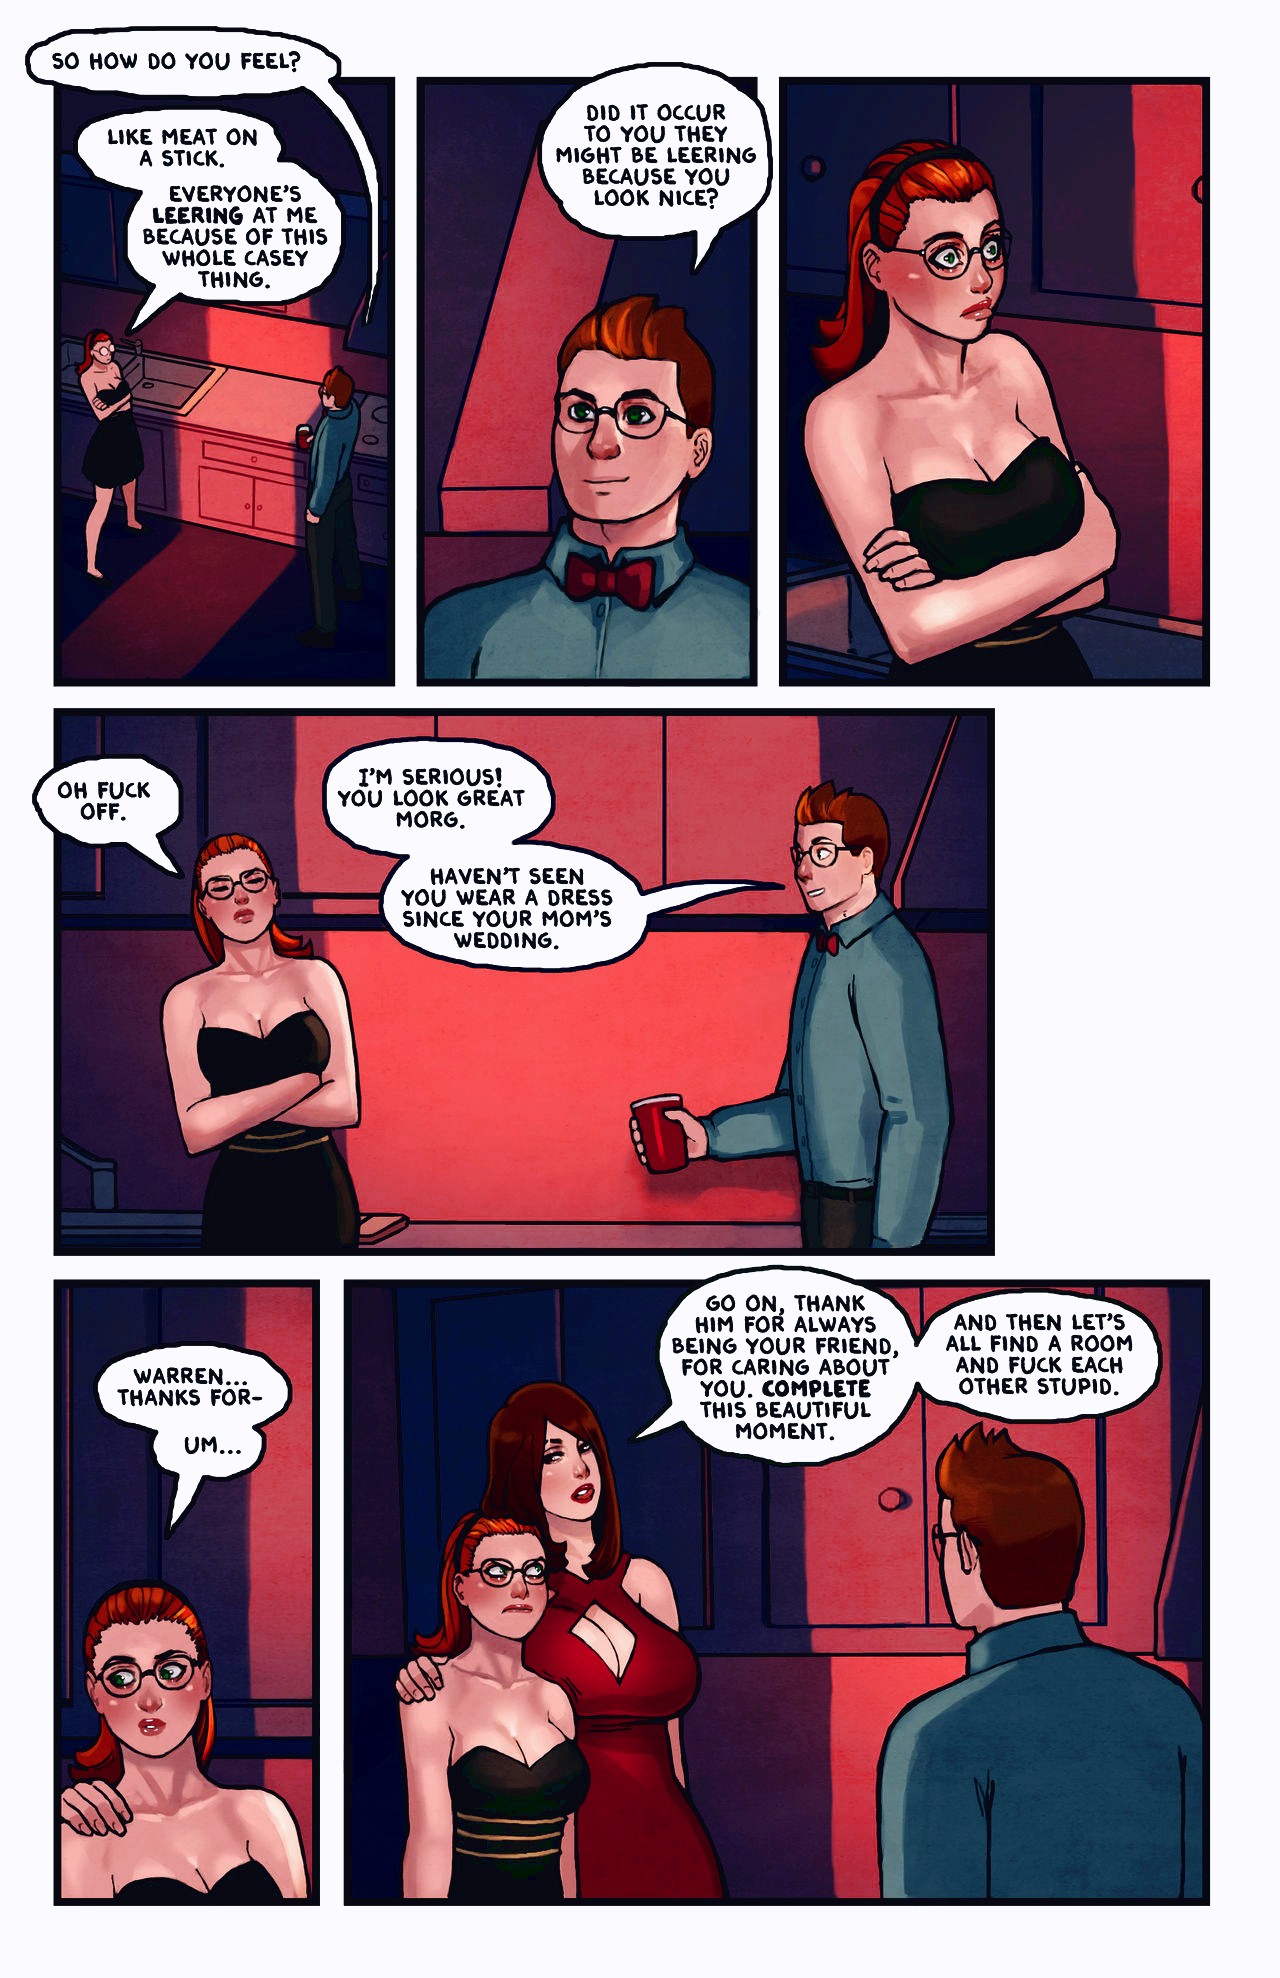 This Romantic World page 068